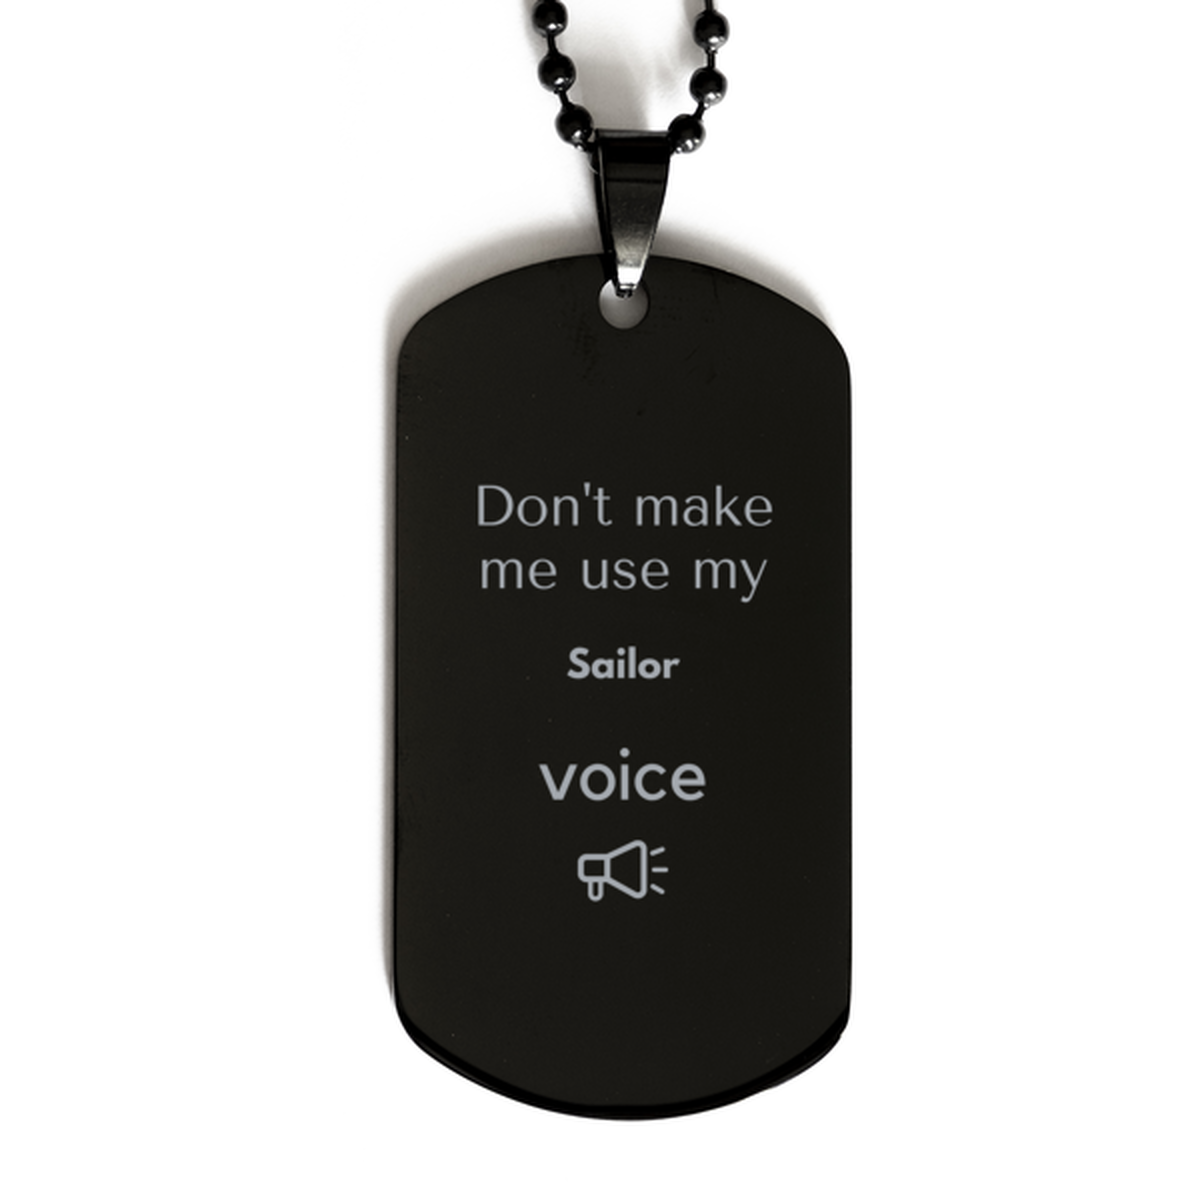 Don't make me use my Sailor voice, Sarcasm Sailor Gifts, Christmas Sailor Black Dog Tag Birthday Unique Gifts For Sailor Coworkers, Men, Women, Colleague, Friends